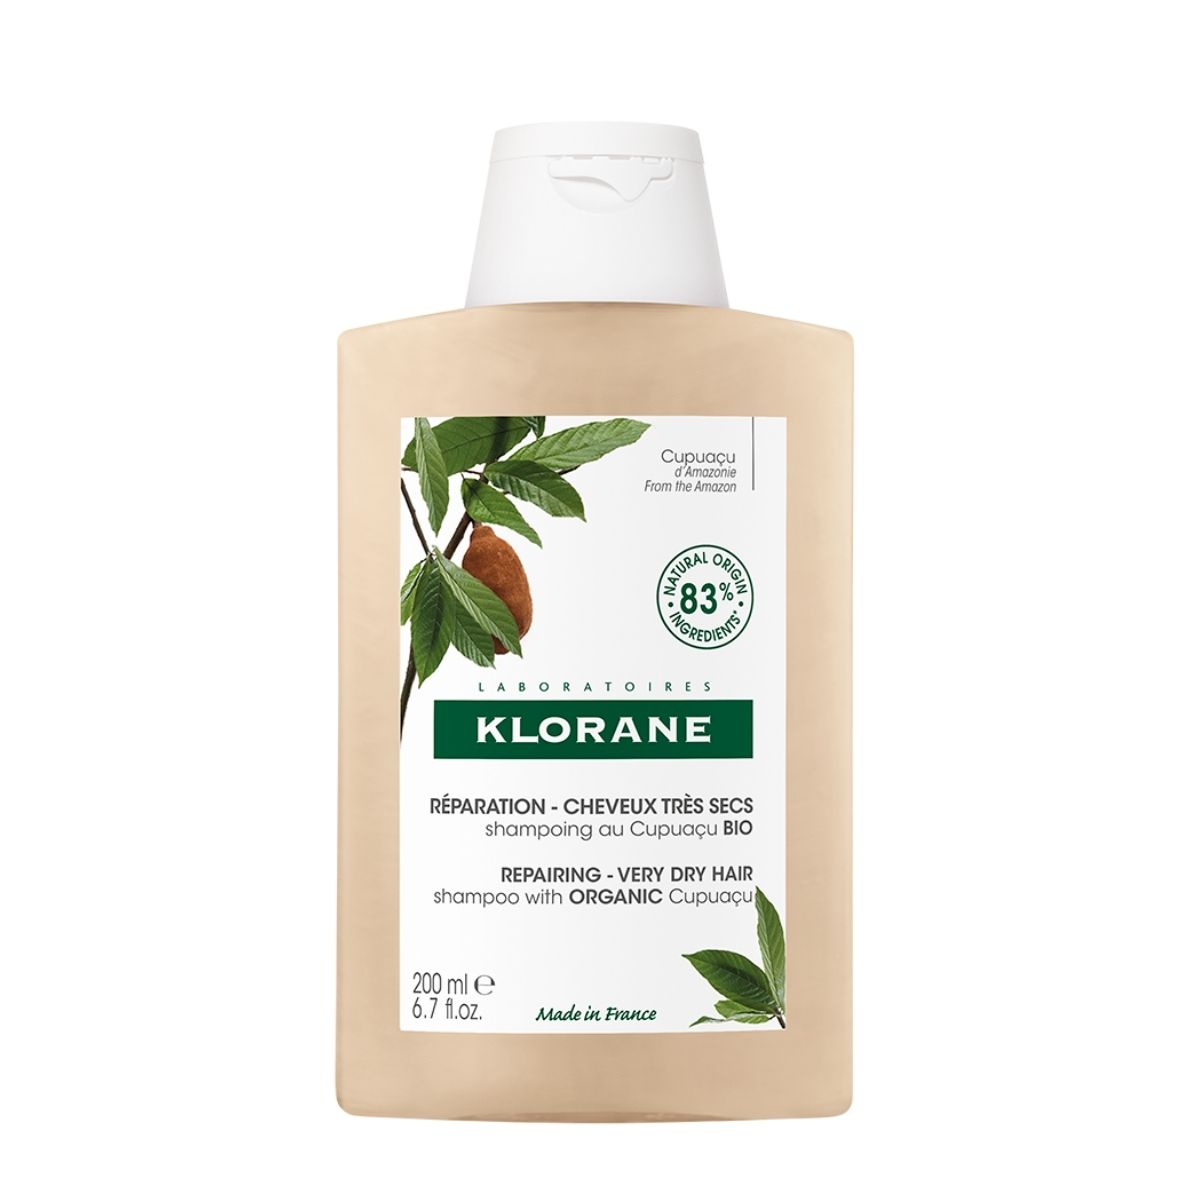 Klorane Organic Cupuaçu Butter Nourishing and Repairing Shampoo for Very Dry, Damaged Hair. 60% OFF